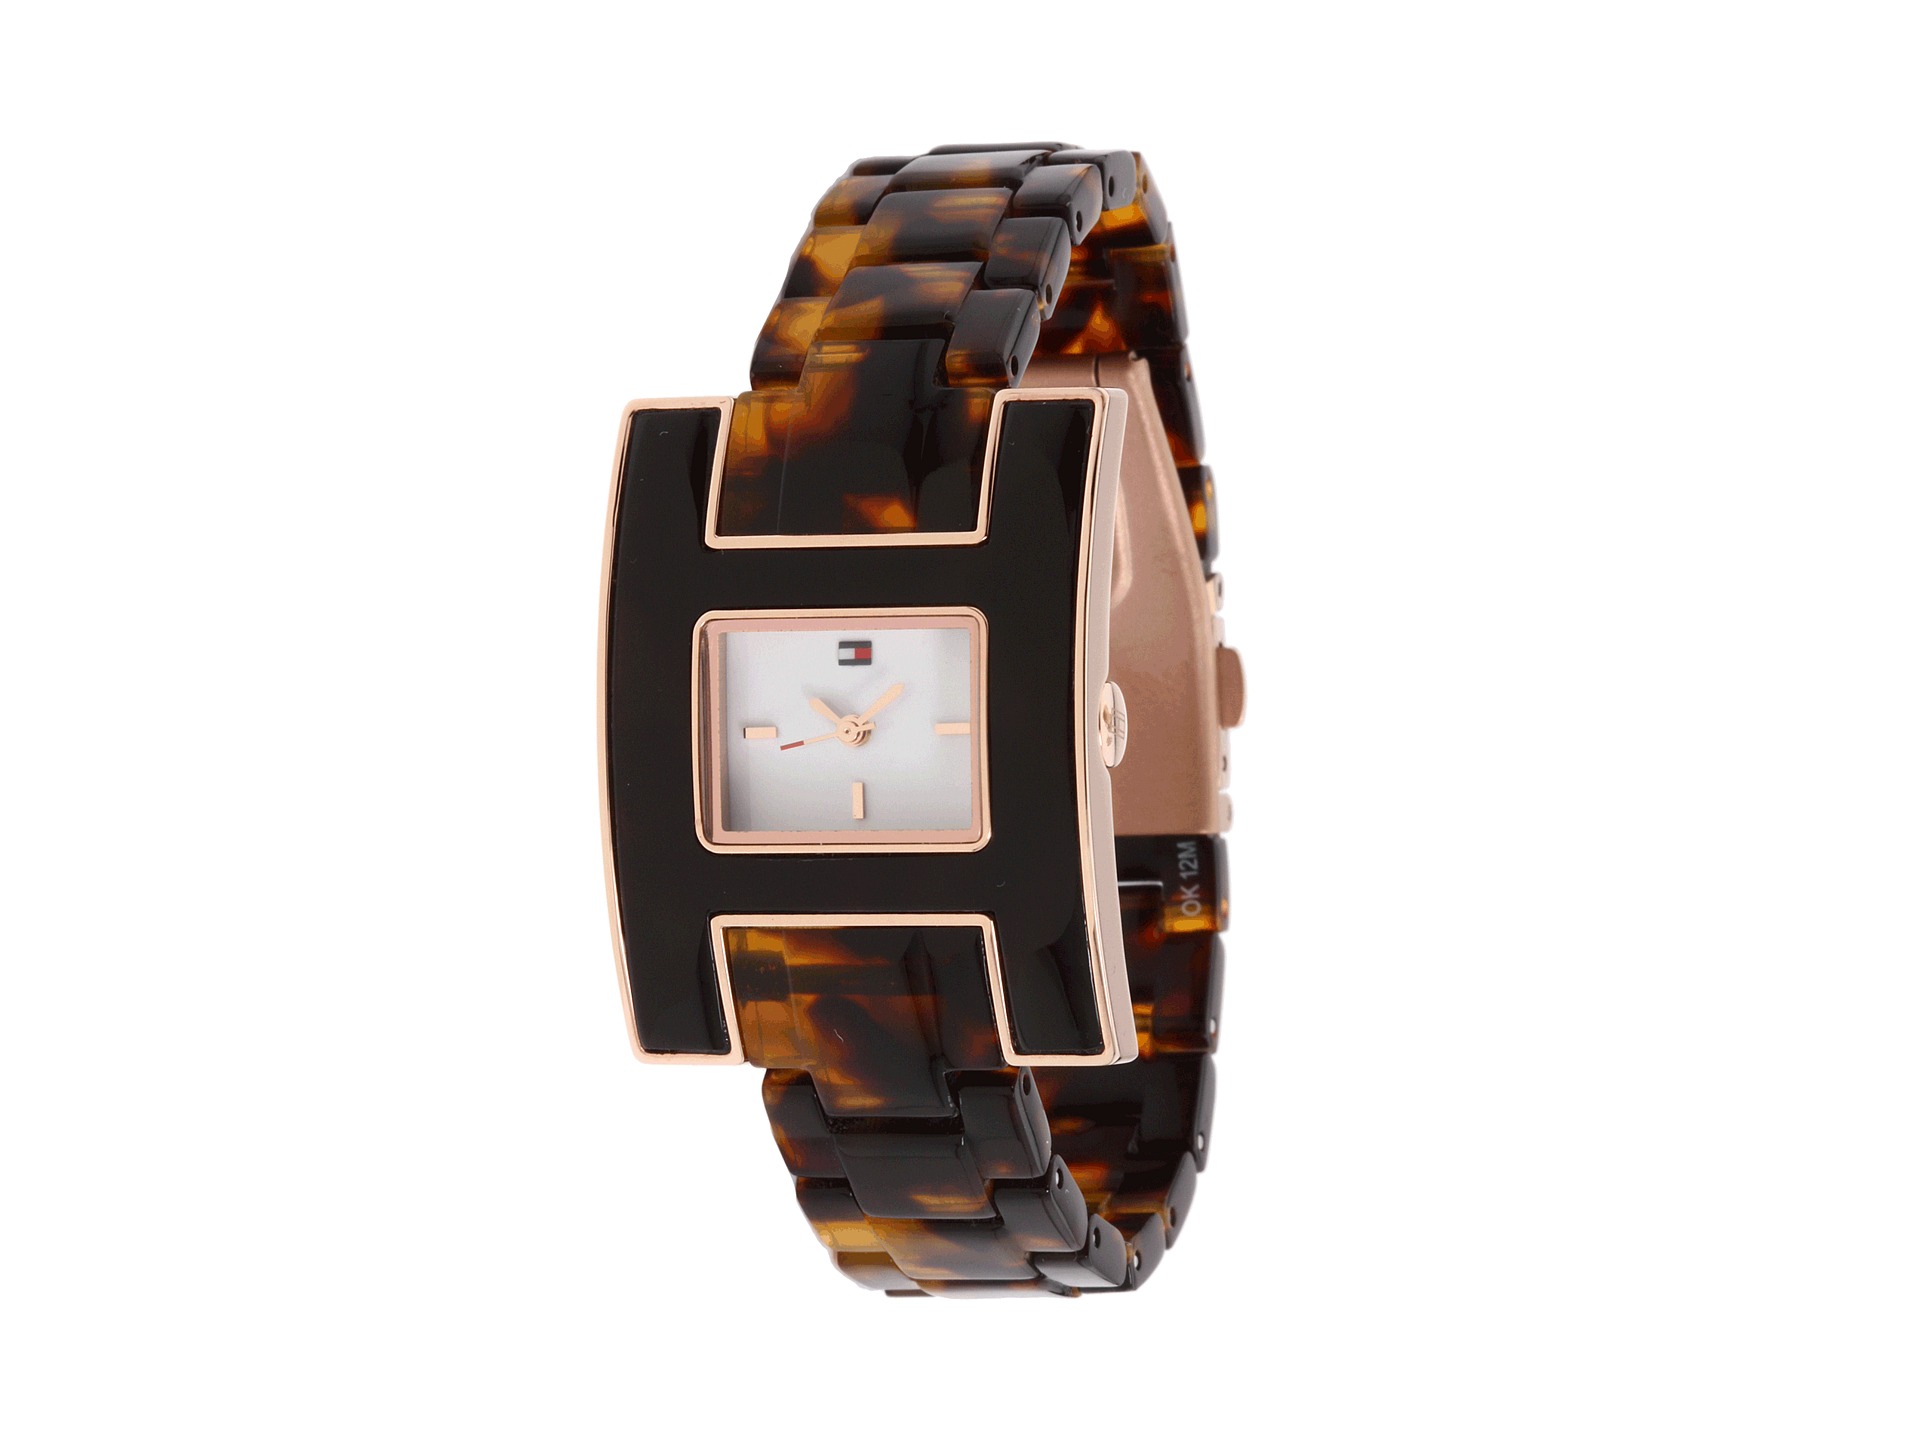   to your wrist with this chic tommy hilfiger timepiece stainless steel